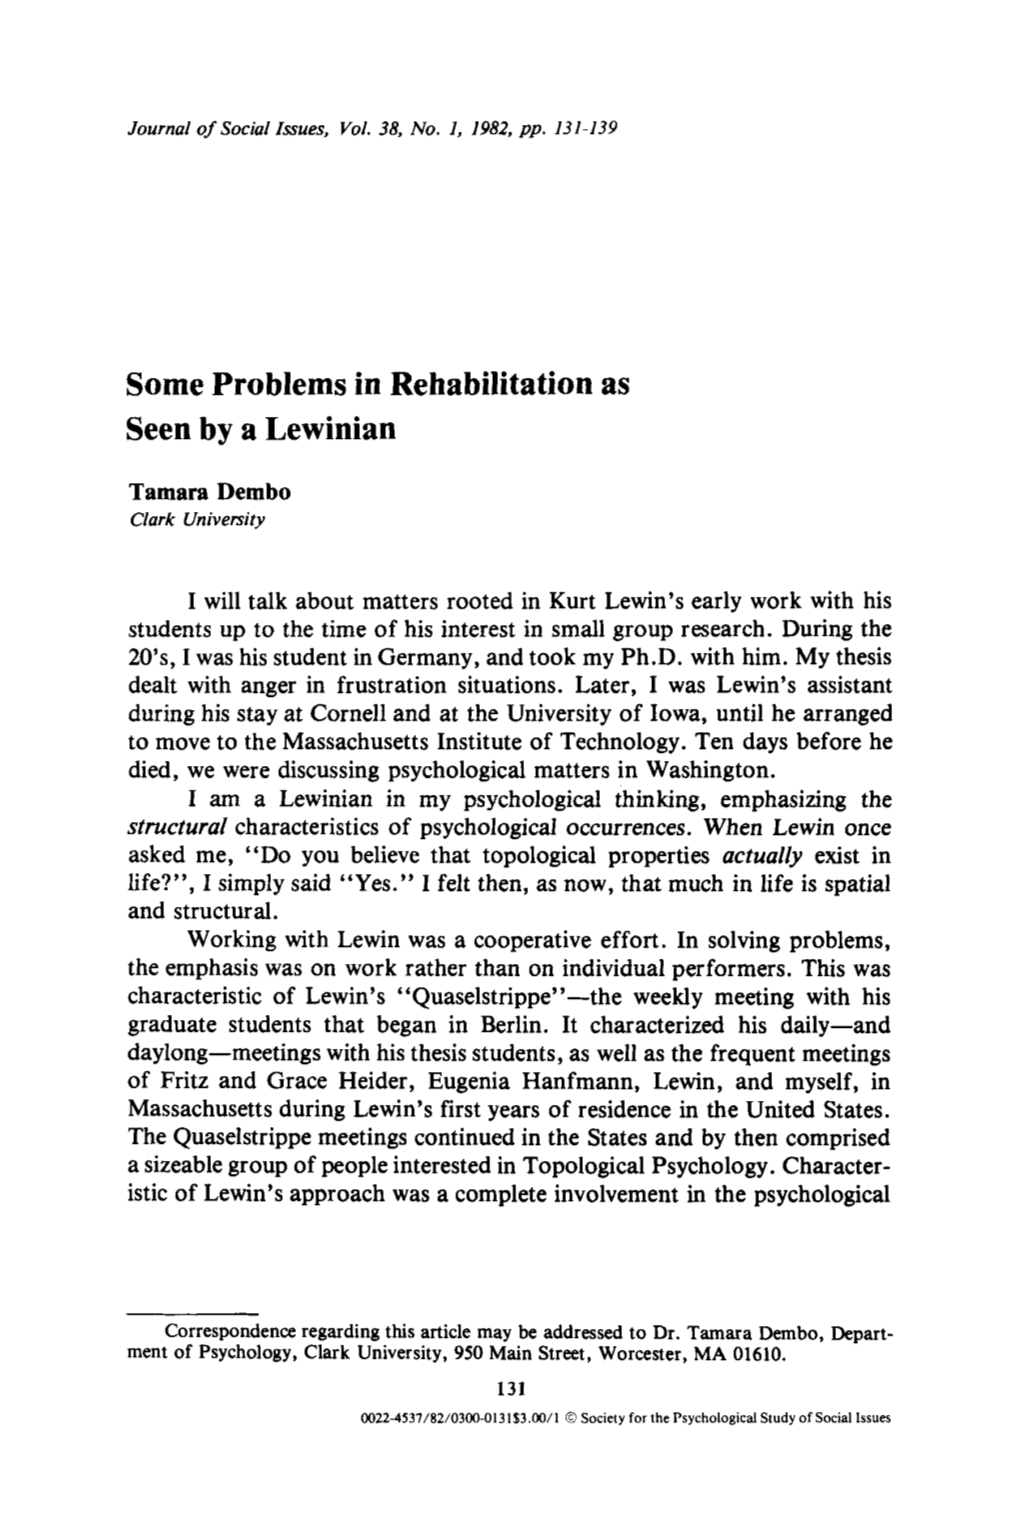 Some Problems in Rehabilitation As Seen by a Lewinian